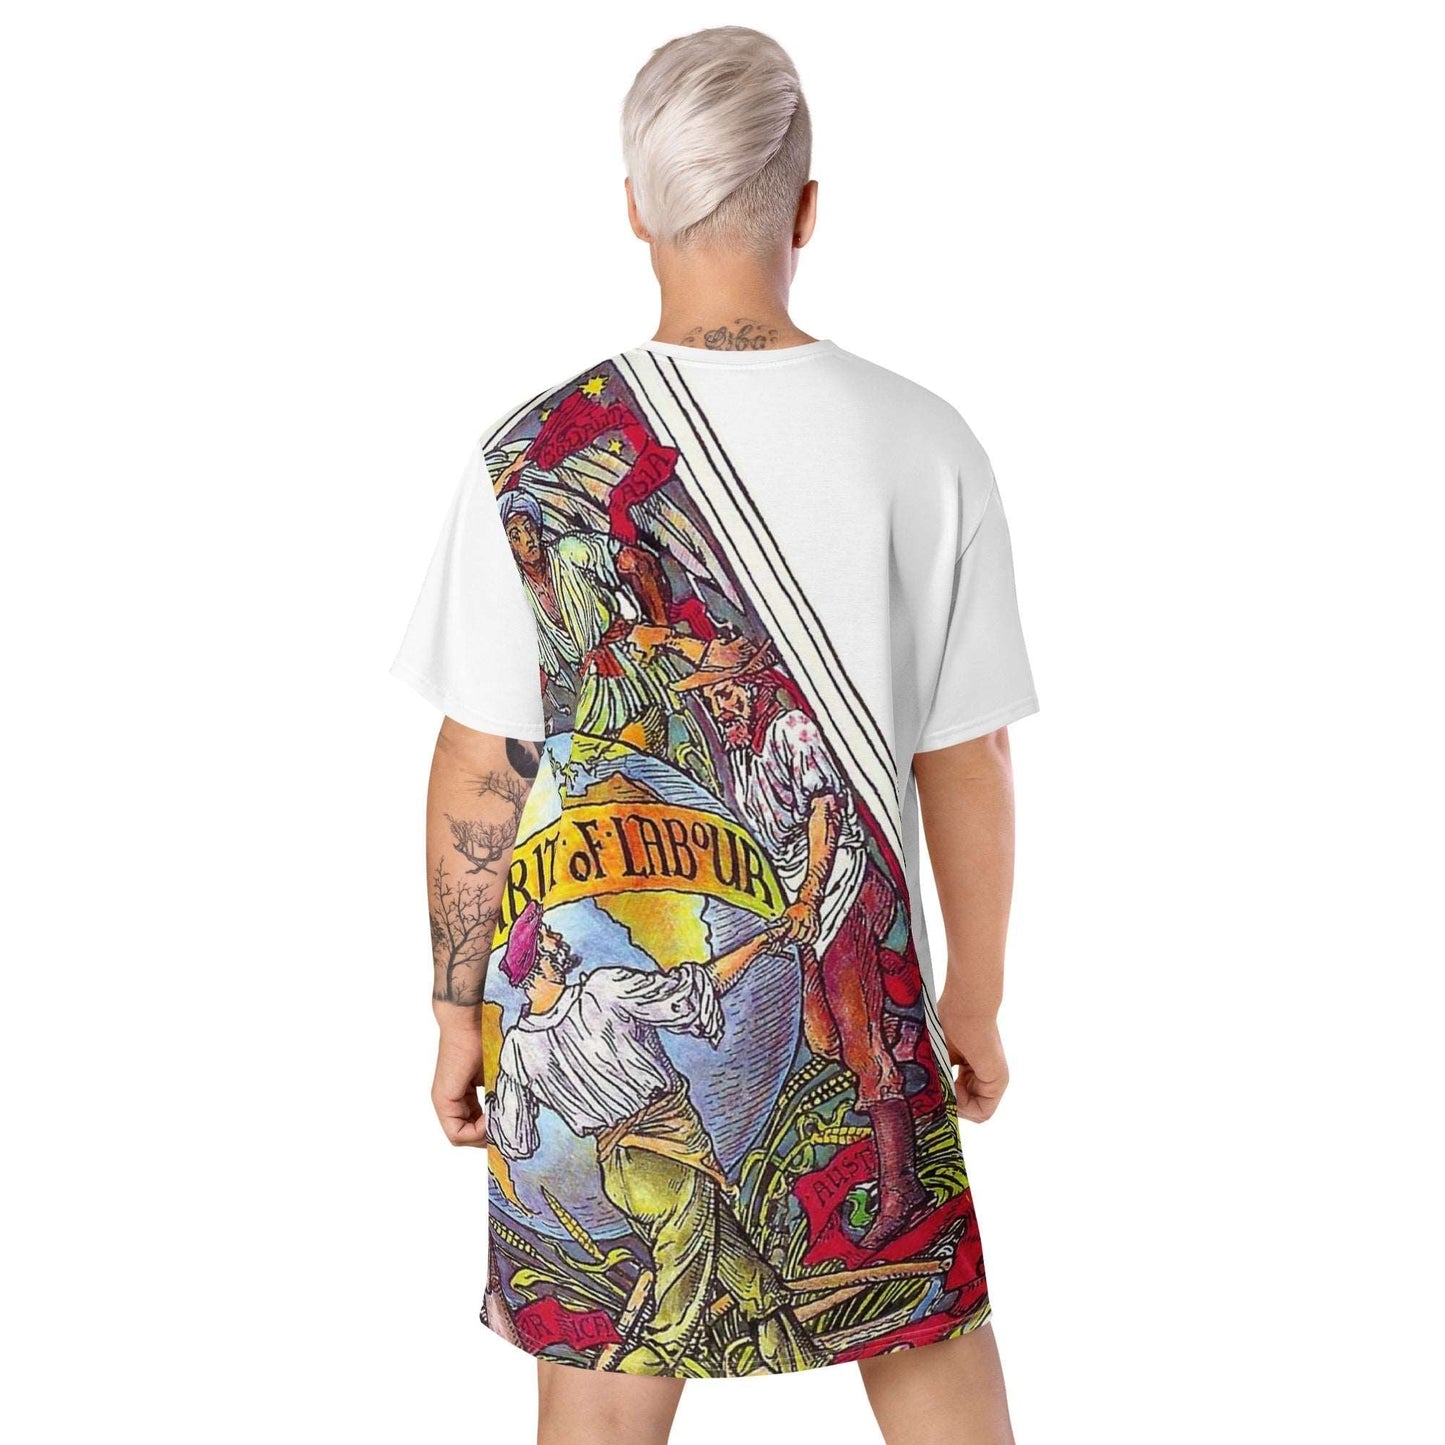 Solidarity - All-Over Print Dress - Souled Out World